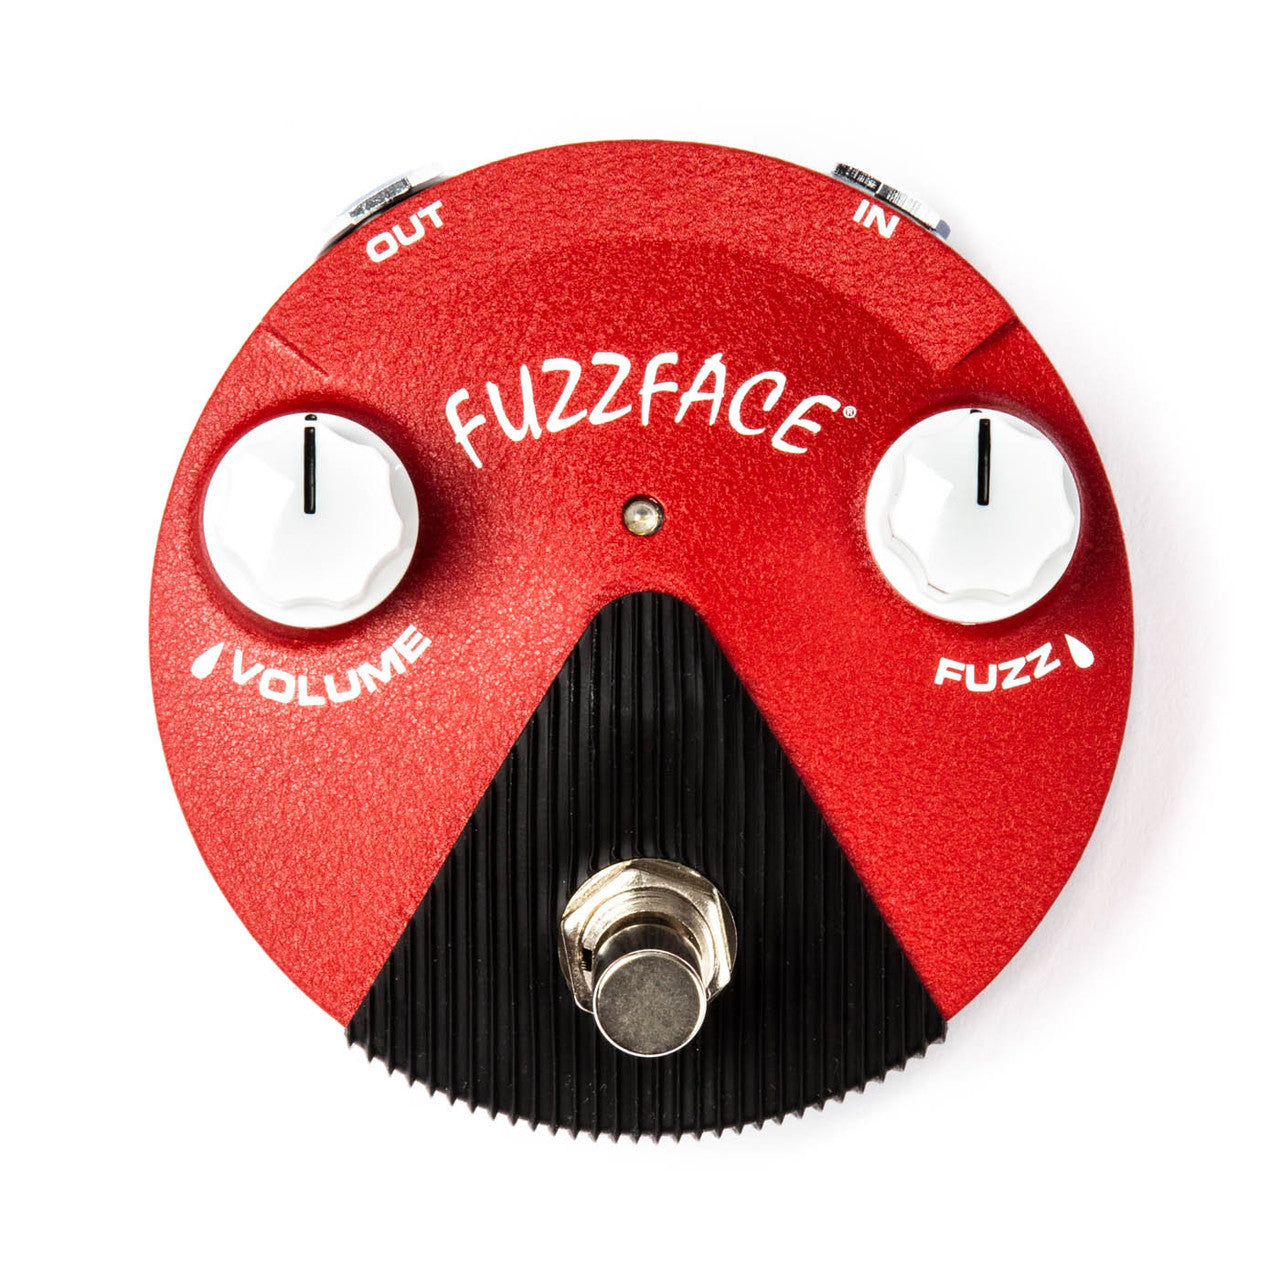 Band of Gypsys Fuzz Face Mini Distortion